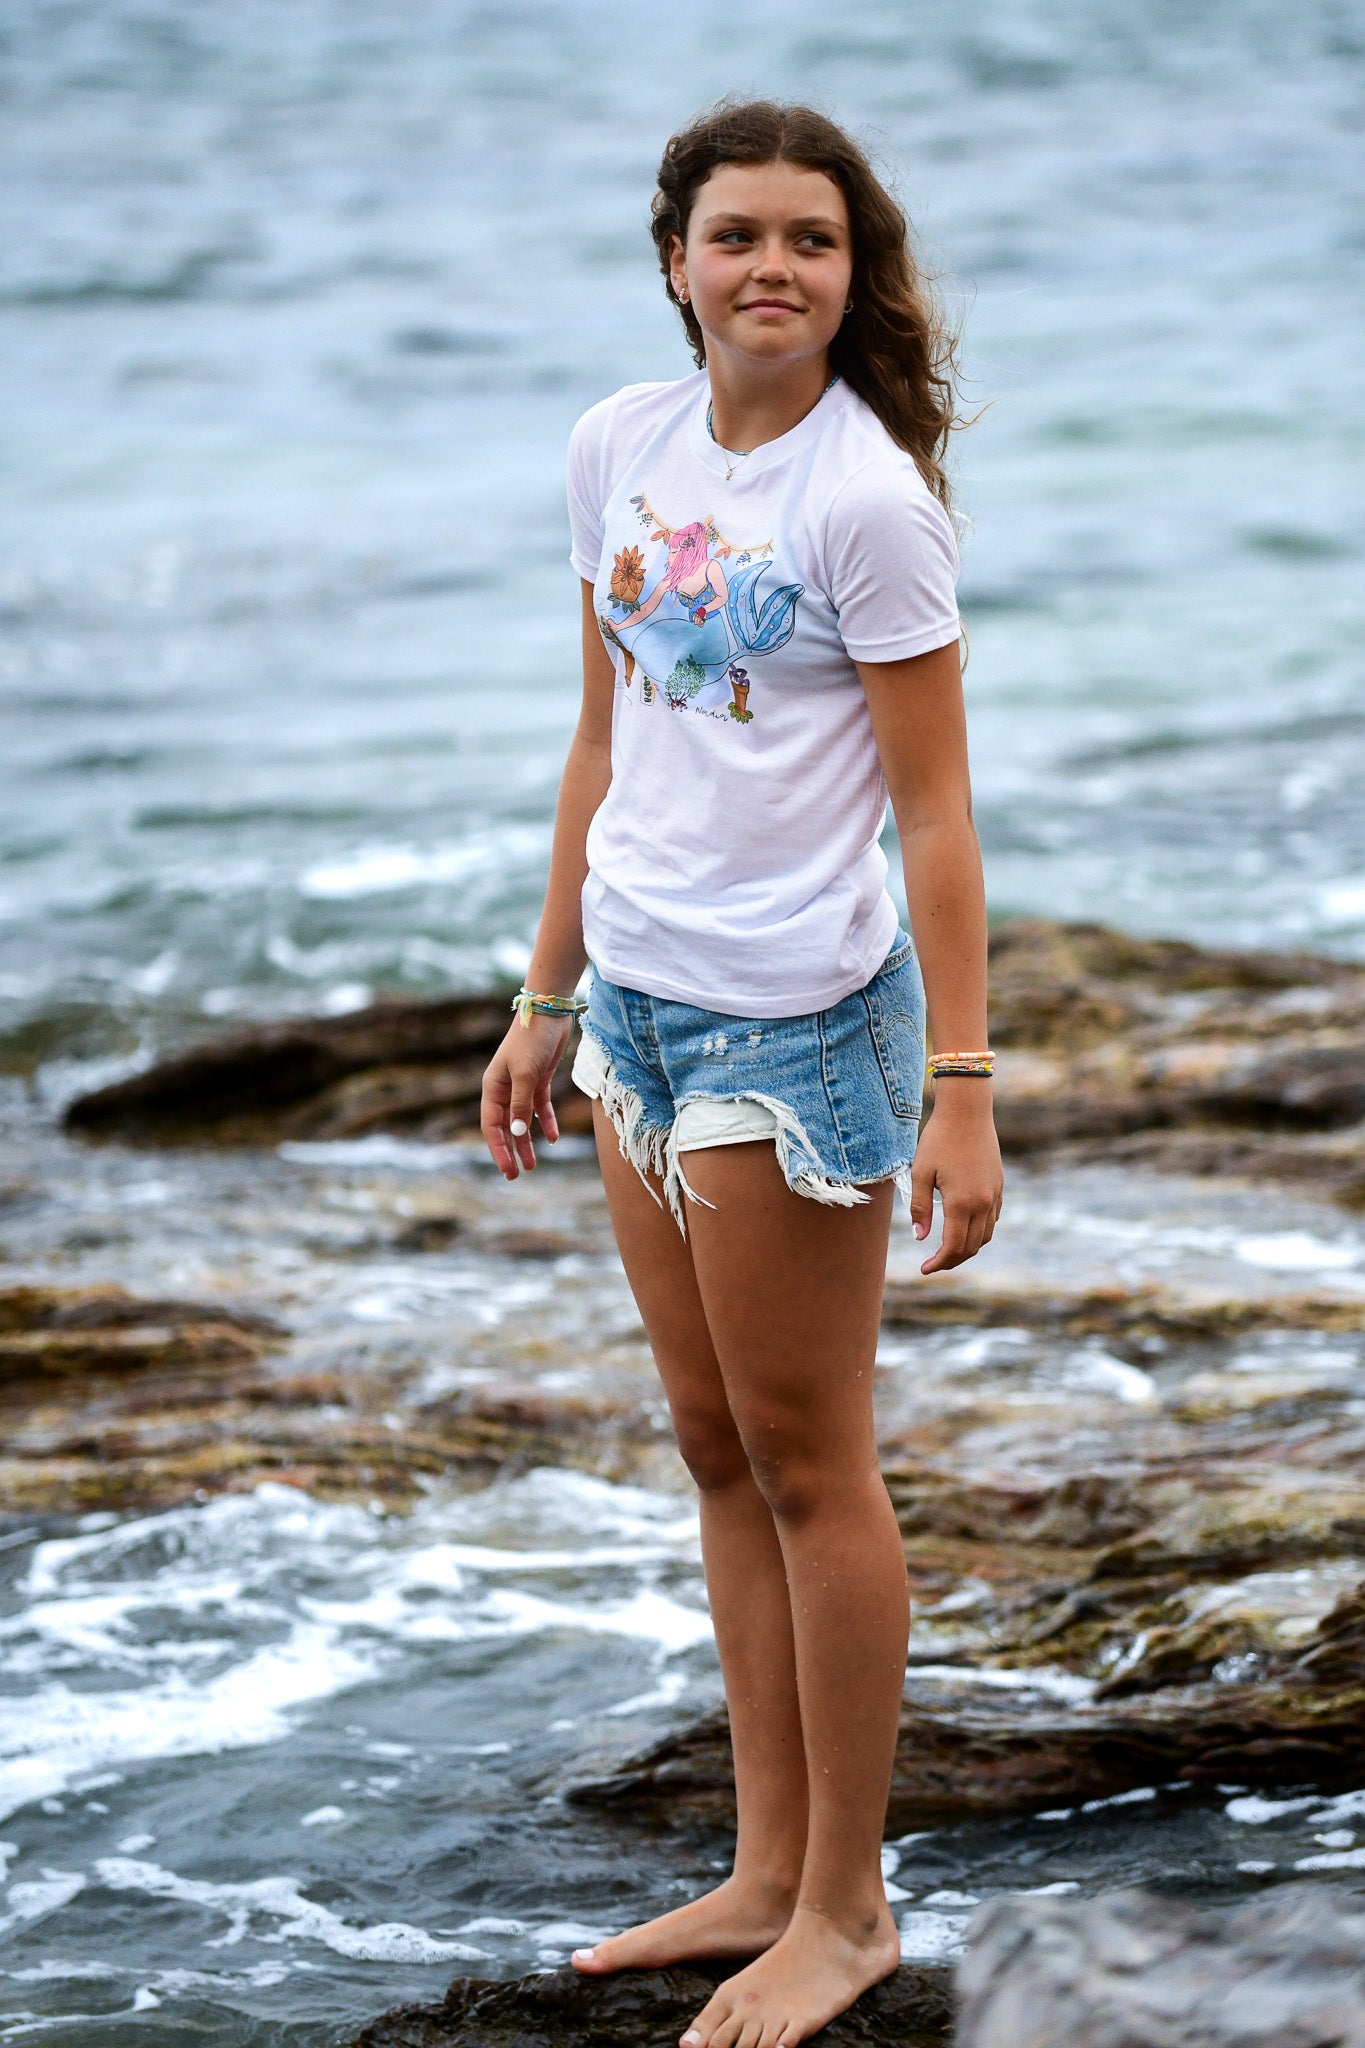 Mermaid graphic tee for a surfer girl or beach lover. Wearable art by Nadia Watts. 